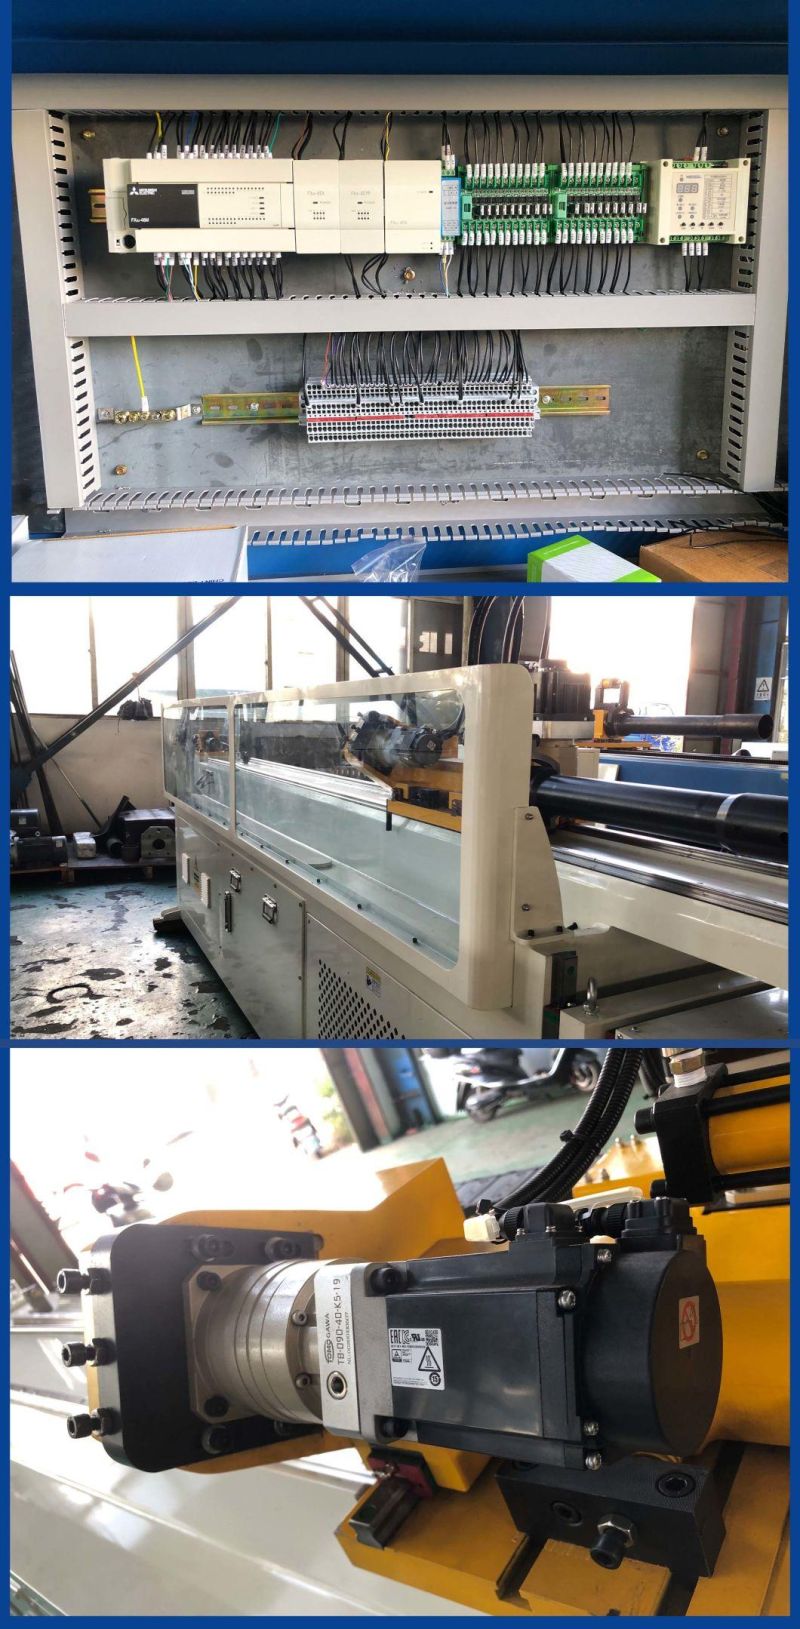 R&D Engineer Highly Recommend Customized 50CNC Hydraulic Table Bender